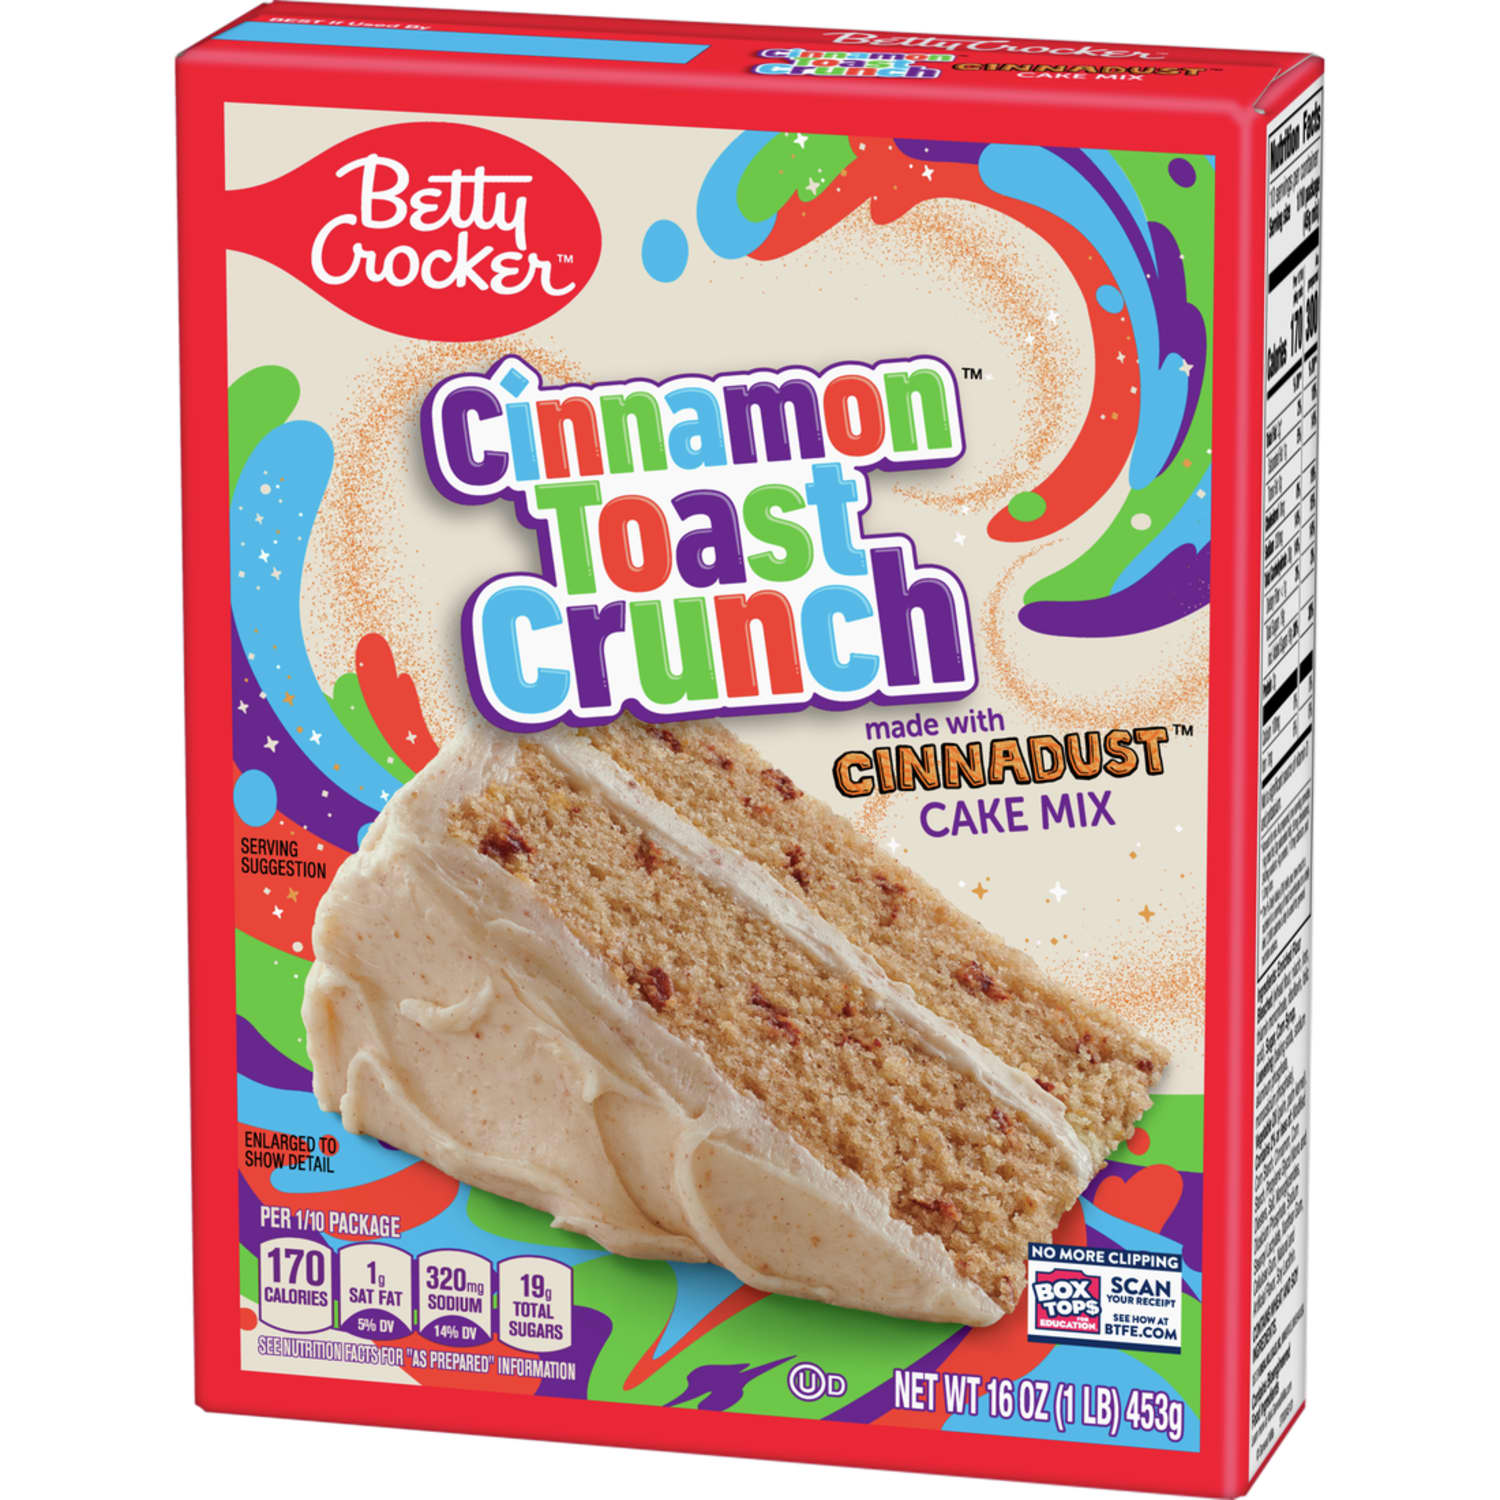 Cinnamon Toast Crunch's New Seasoning Blend Changes Everything